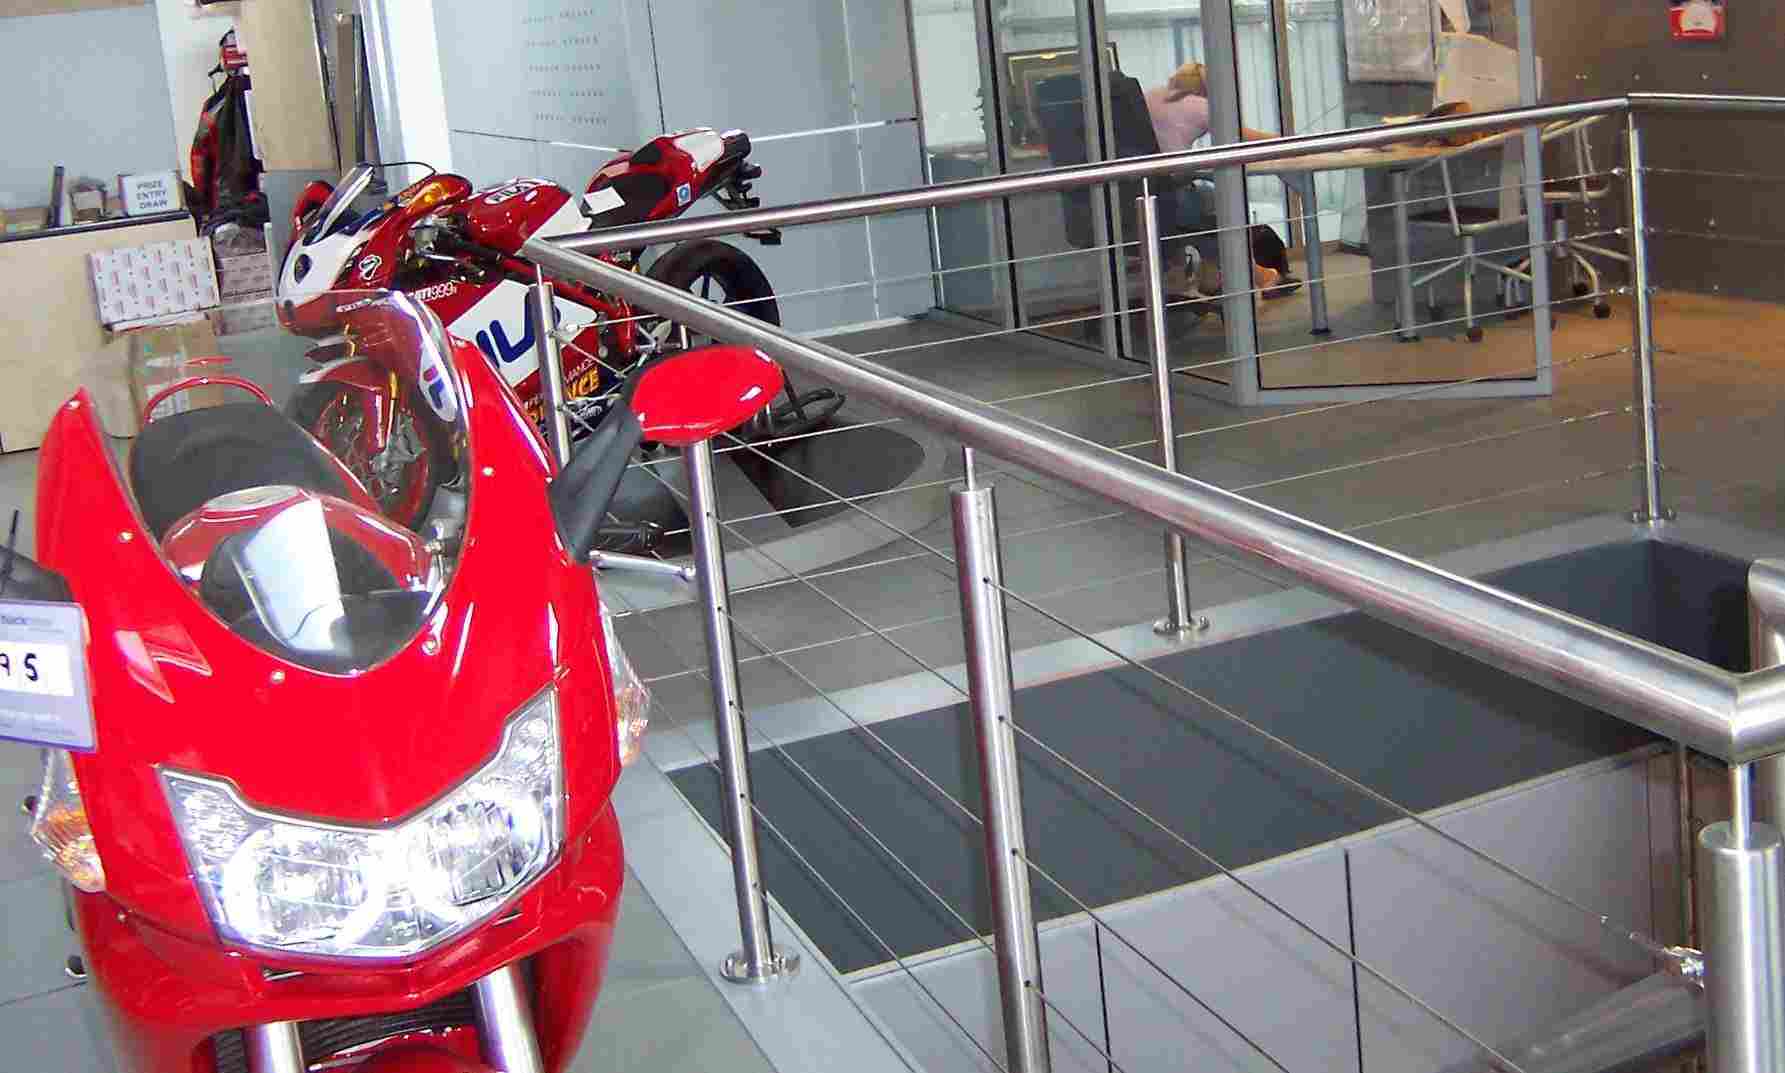 Stainless steel  wire balustrade in a motorcycle showroom.